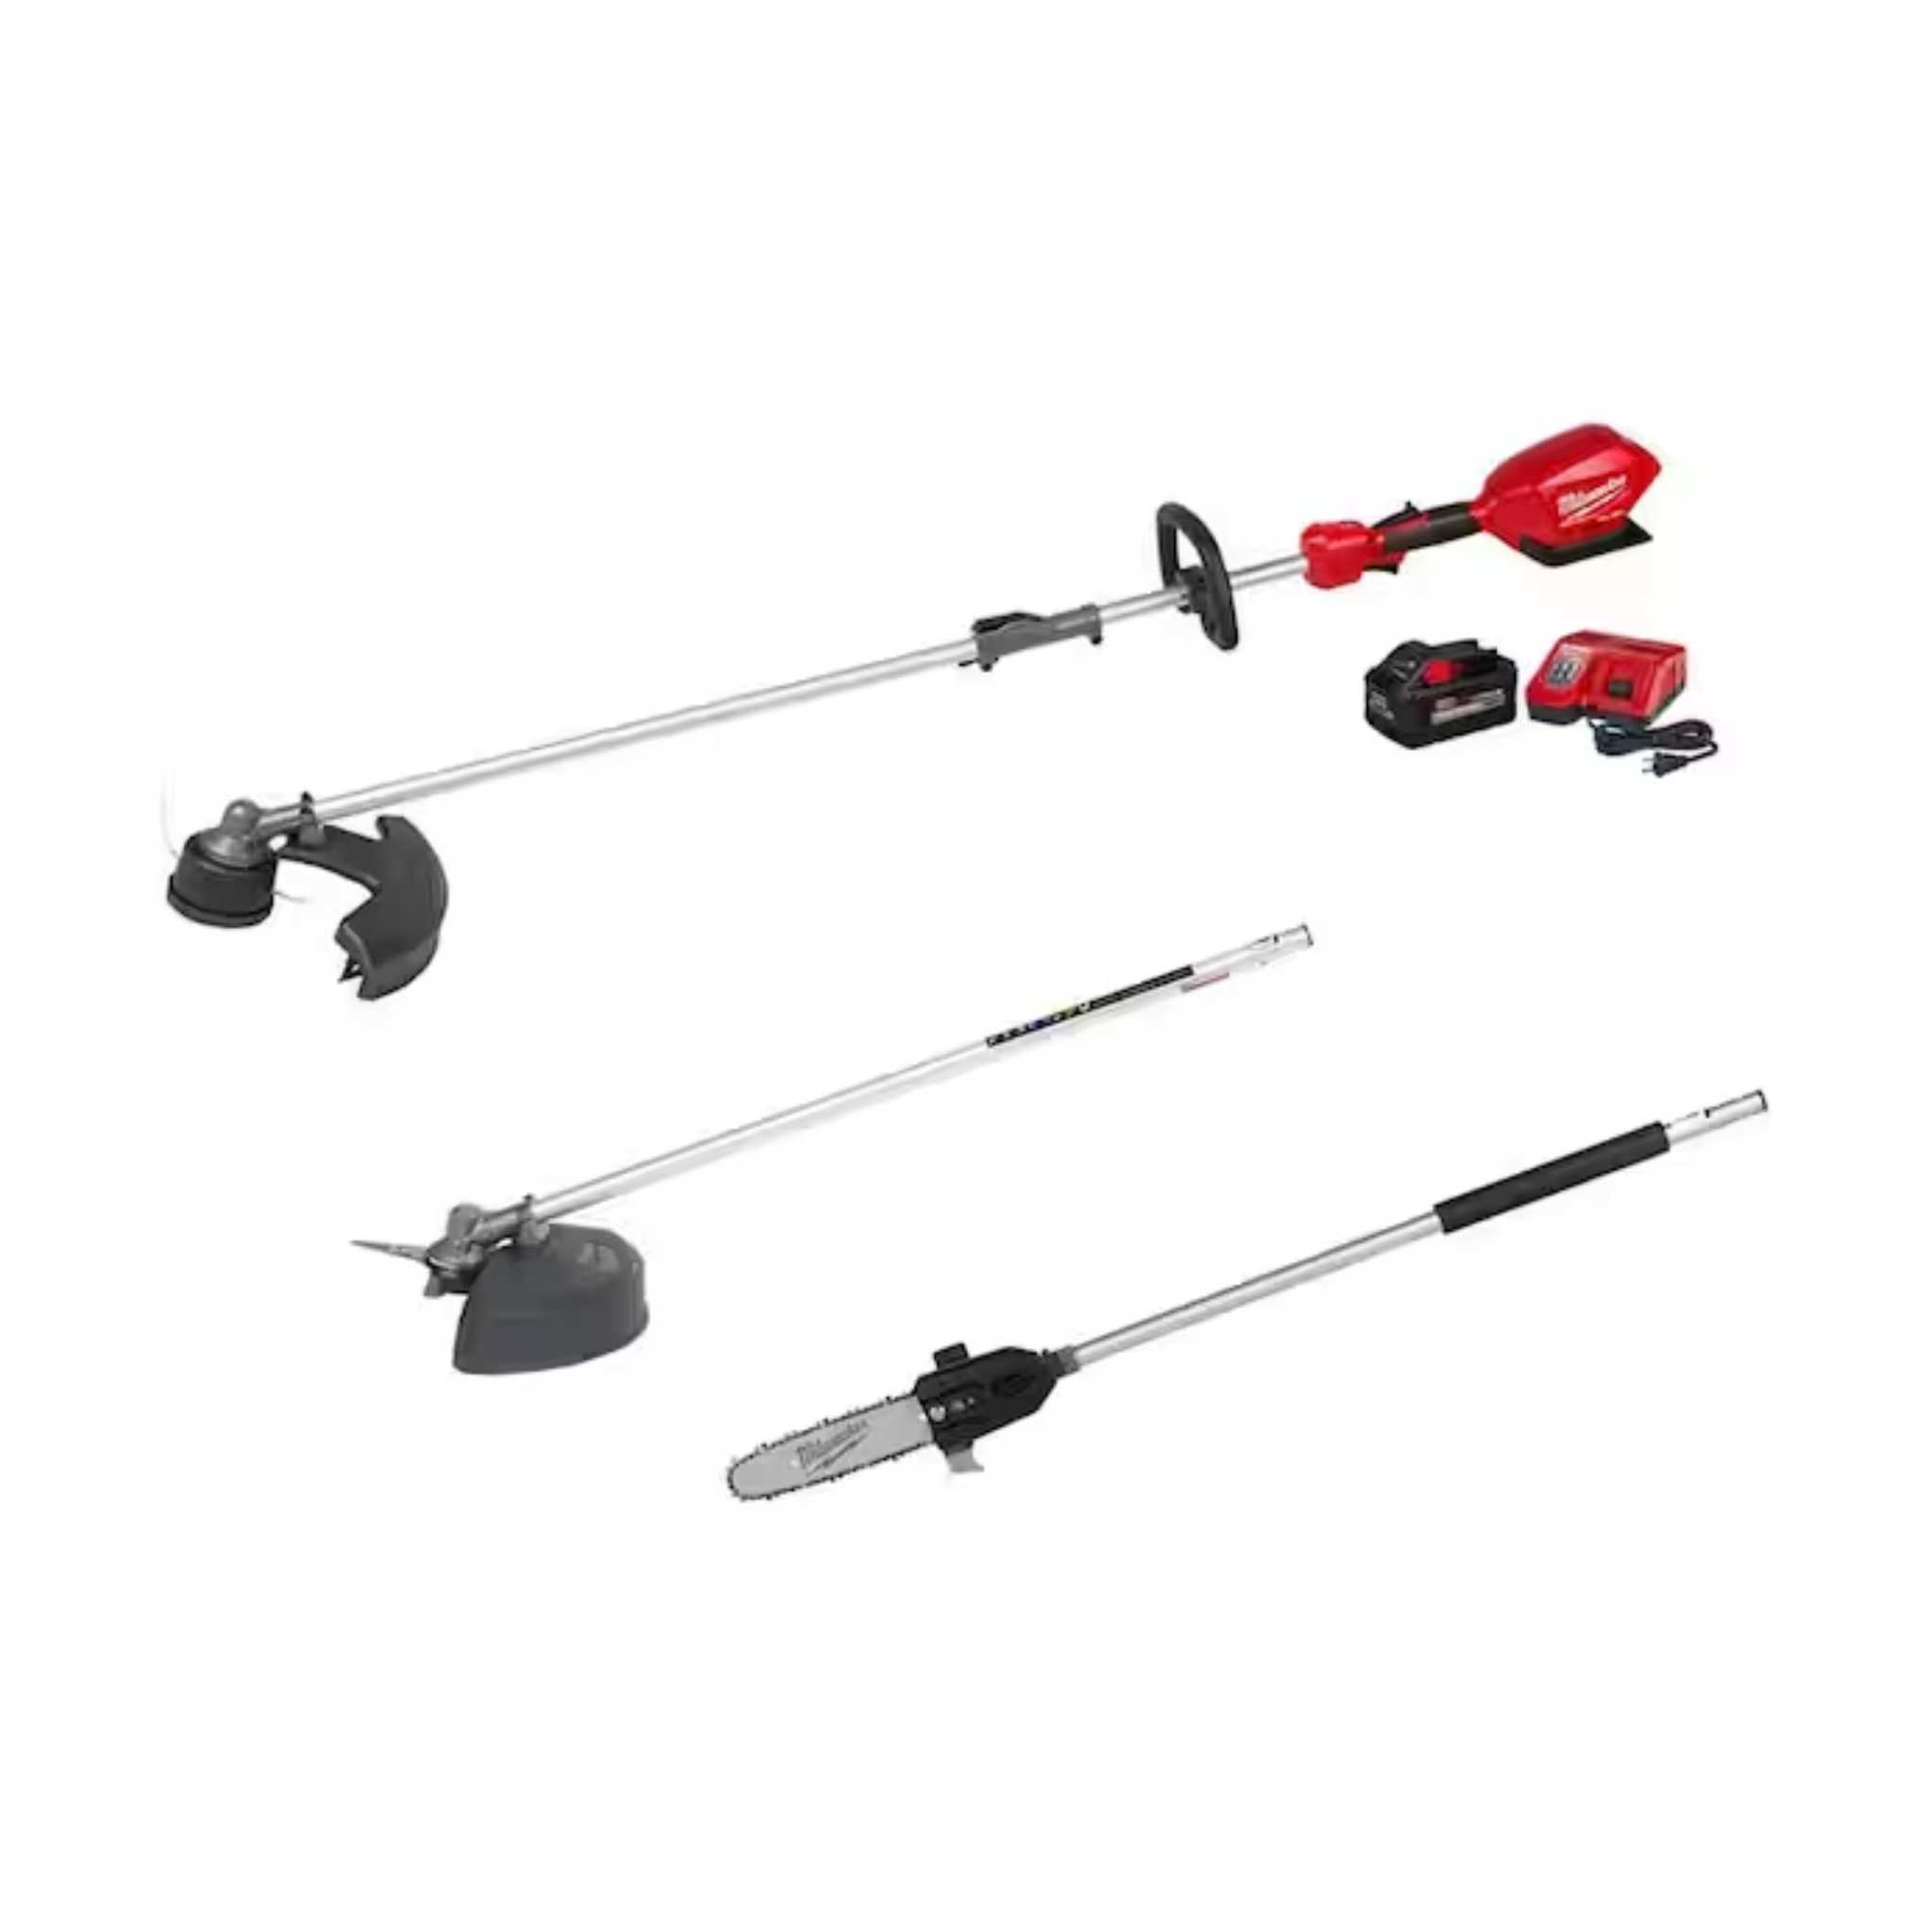 Milwaukee M18 Fuel String Trimmer Kit w/ 8Ah Battery, Brush Cutter & Pole Saw